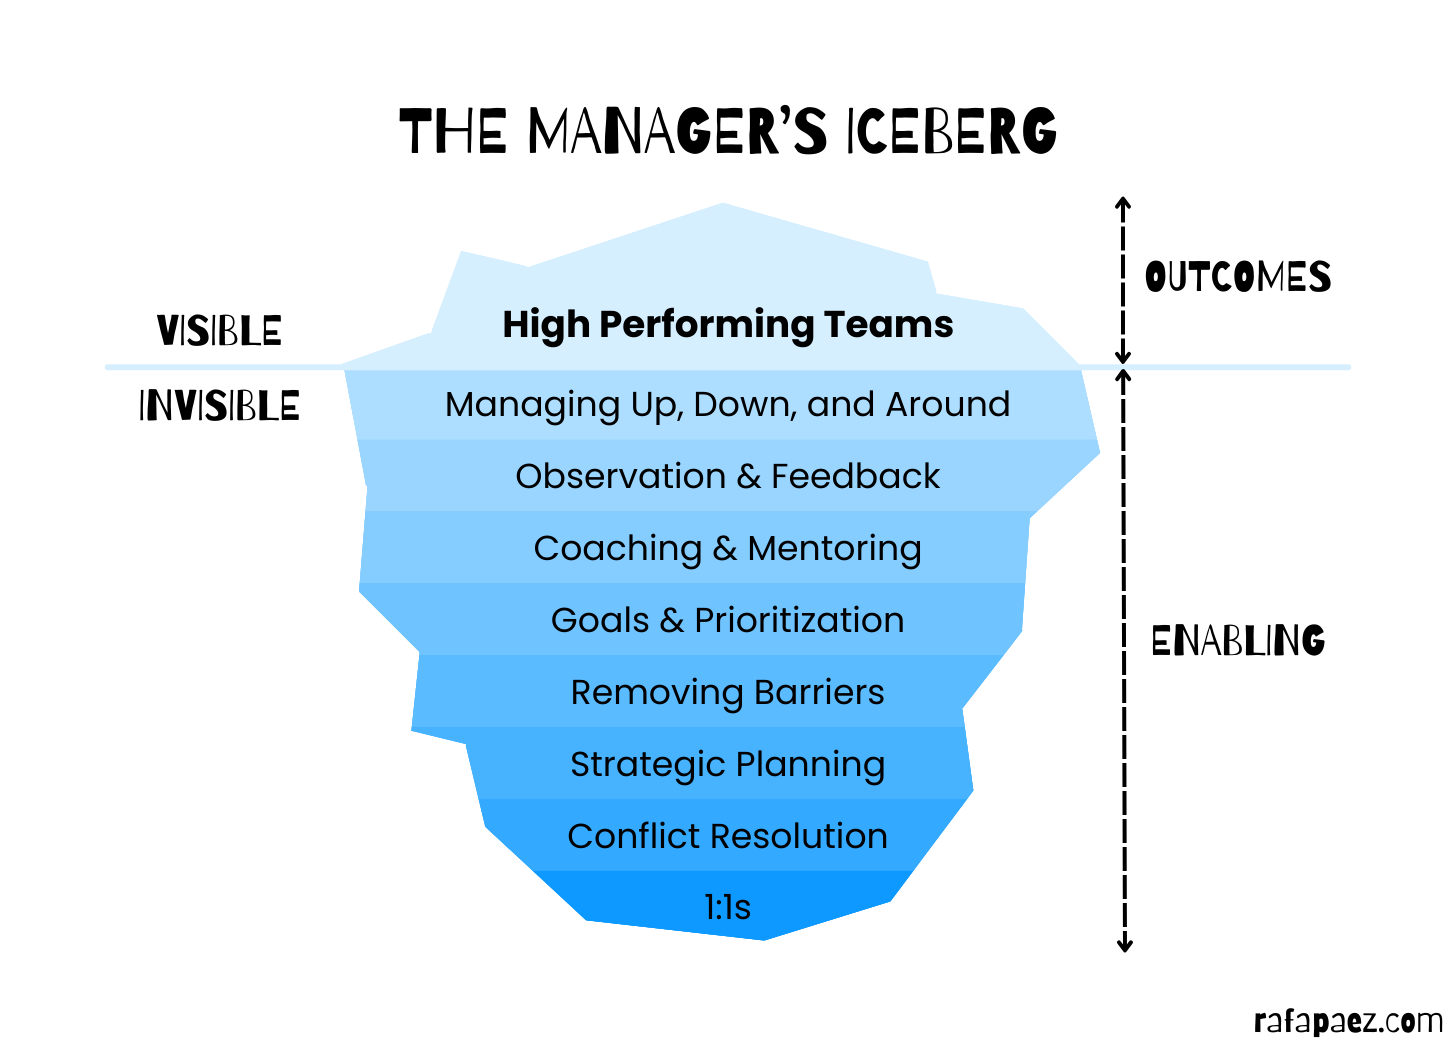 The Manager’s Iceberg